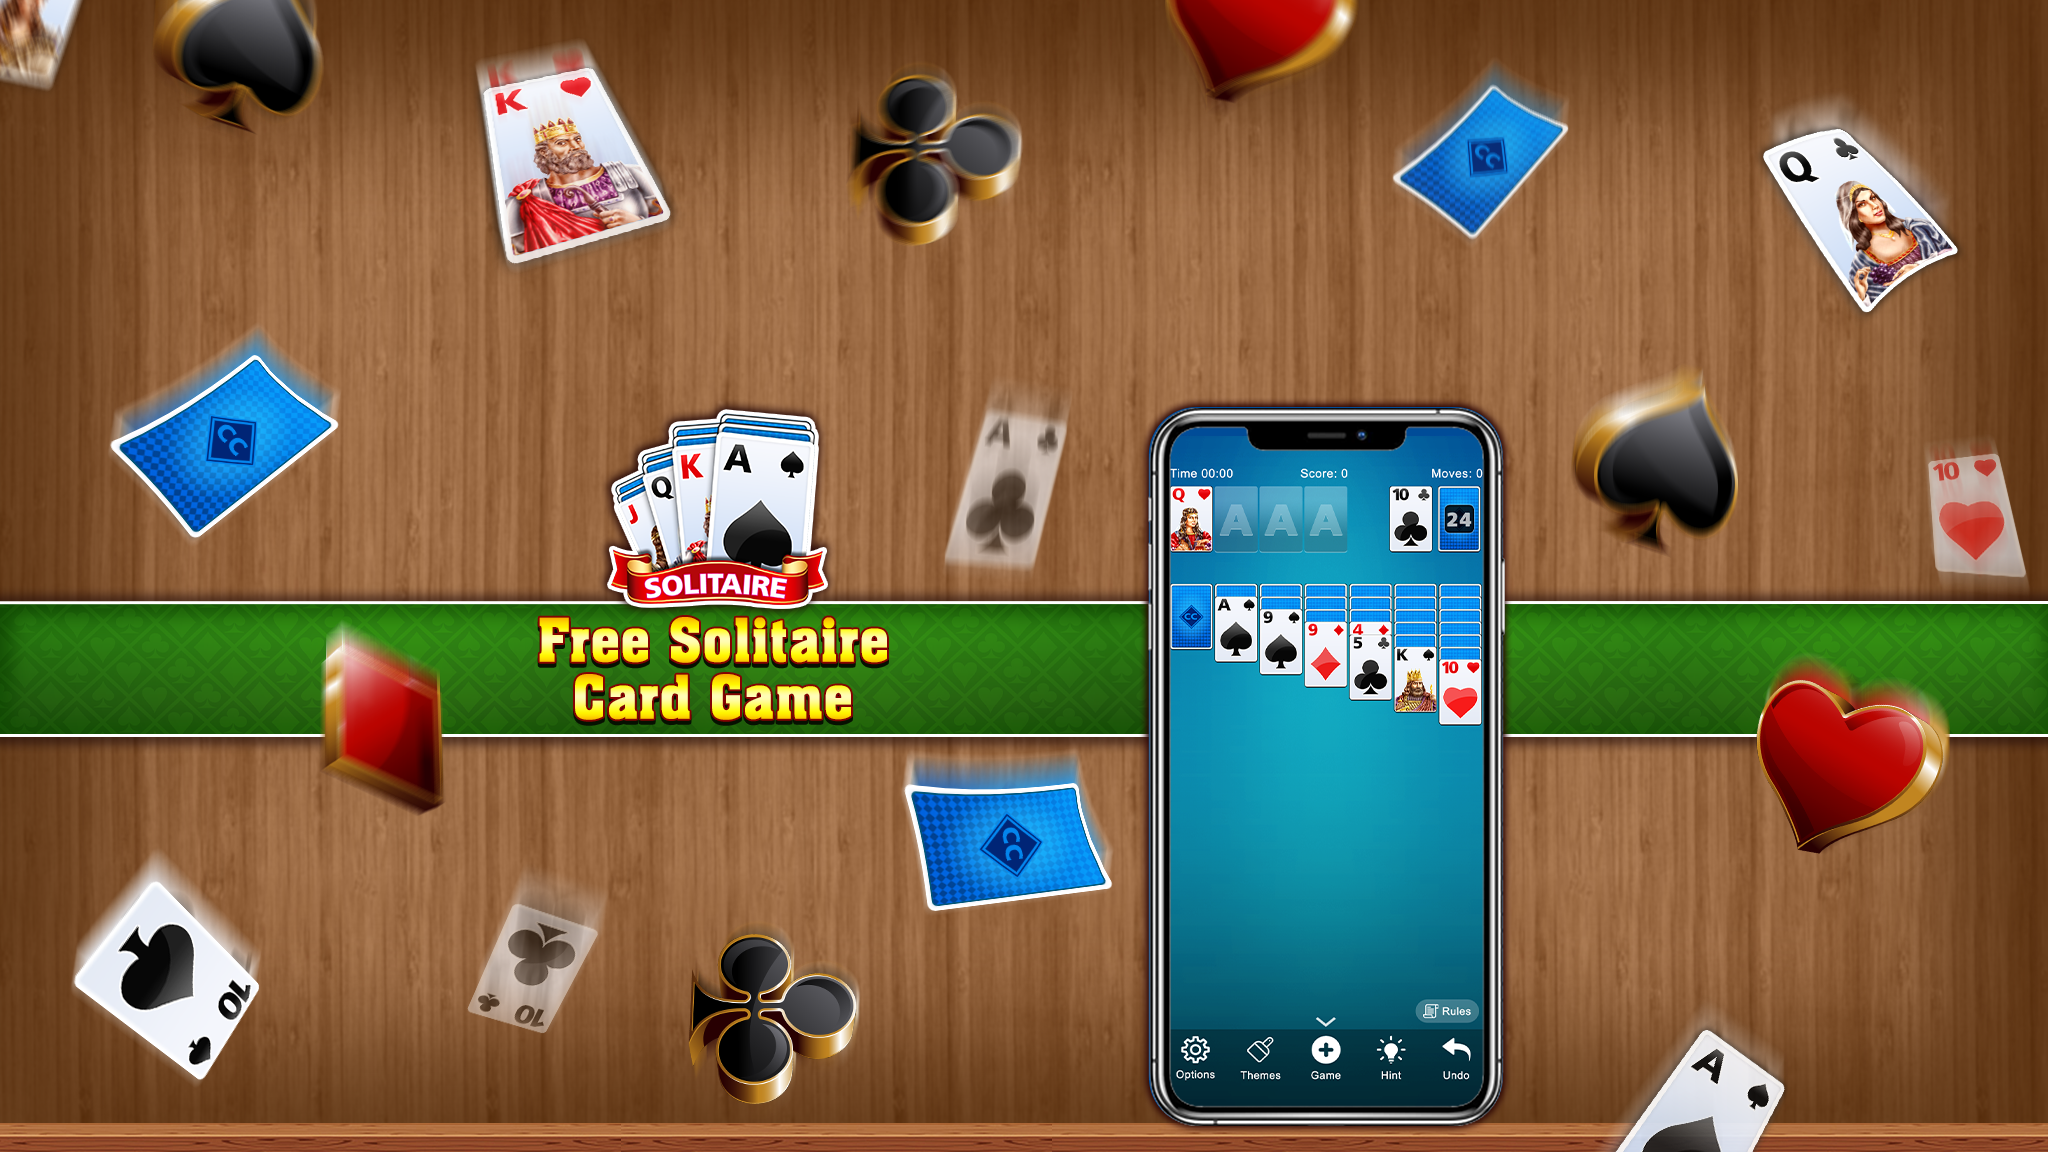 Learn About the 5 Benefits of Playing Solitaire